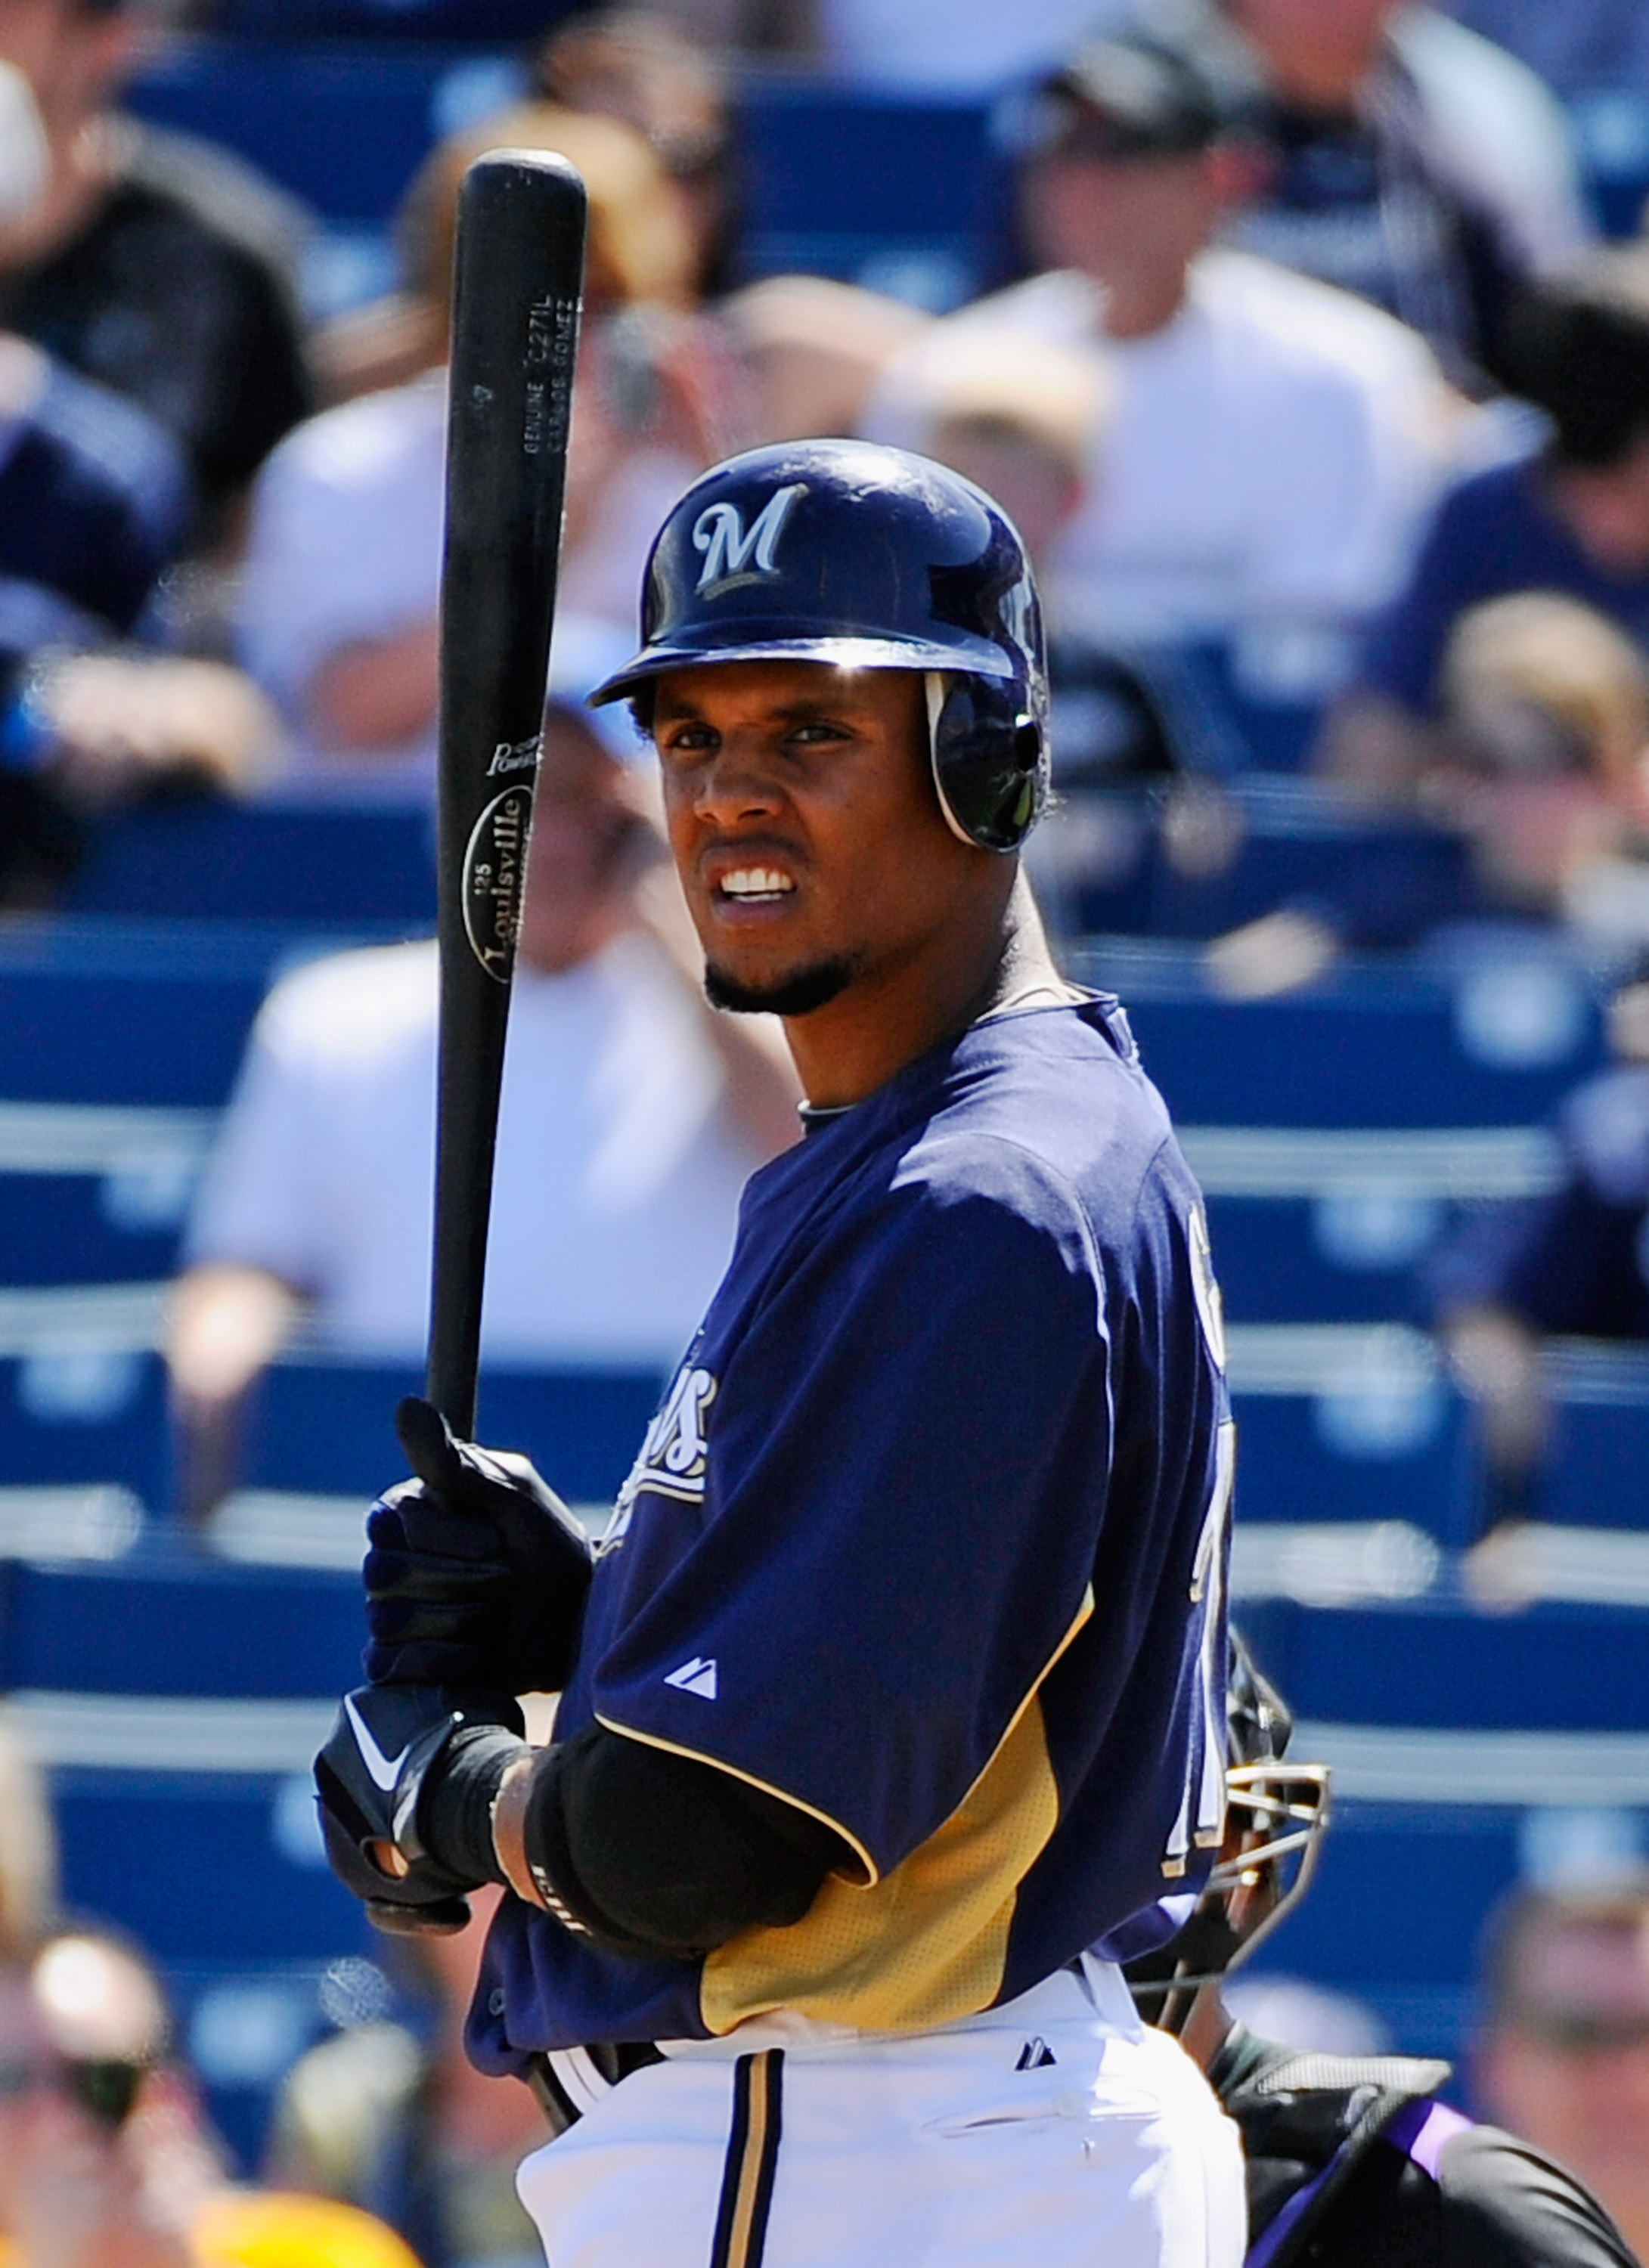 PHOENIX, AZ - MARCH 10:  Carlos Gomez #27 of the Milwaukee Brewers against the Colorado Rockies during the spring training baseball game at Maryvale Baseball Park on March 10, 2011 in Phoenix, Arizona.  (Photo by Kevork Djansezian/Getty Images)